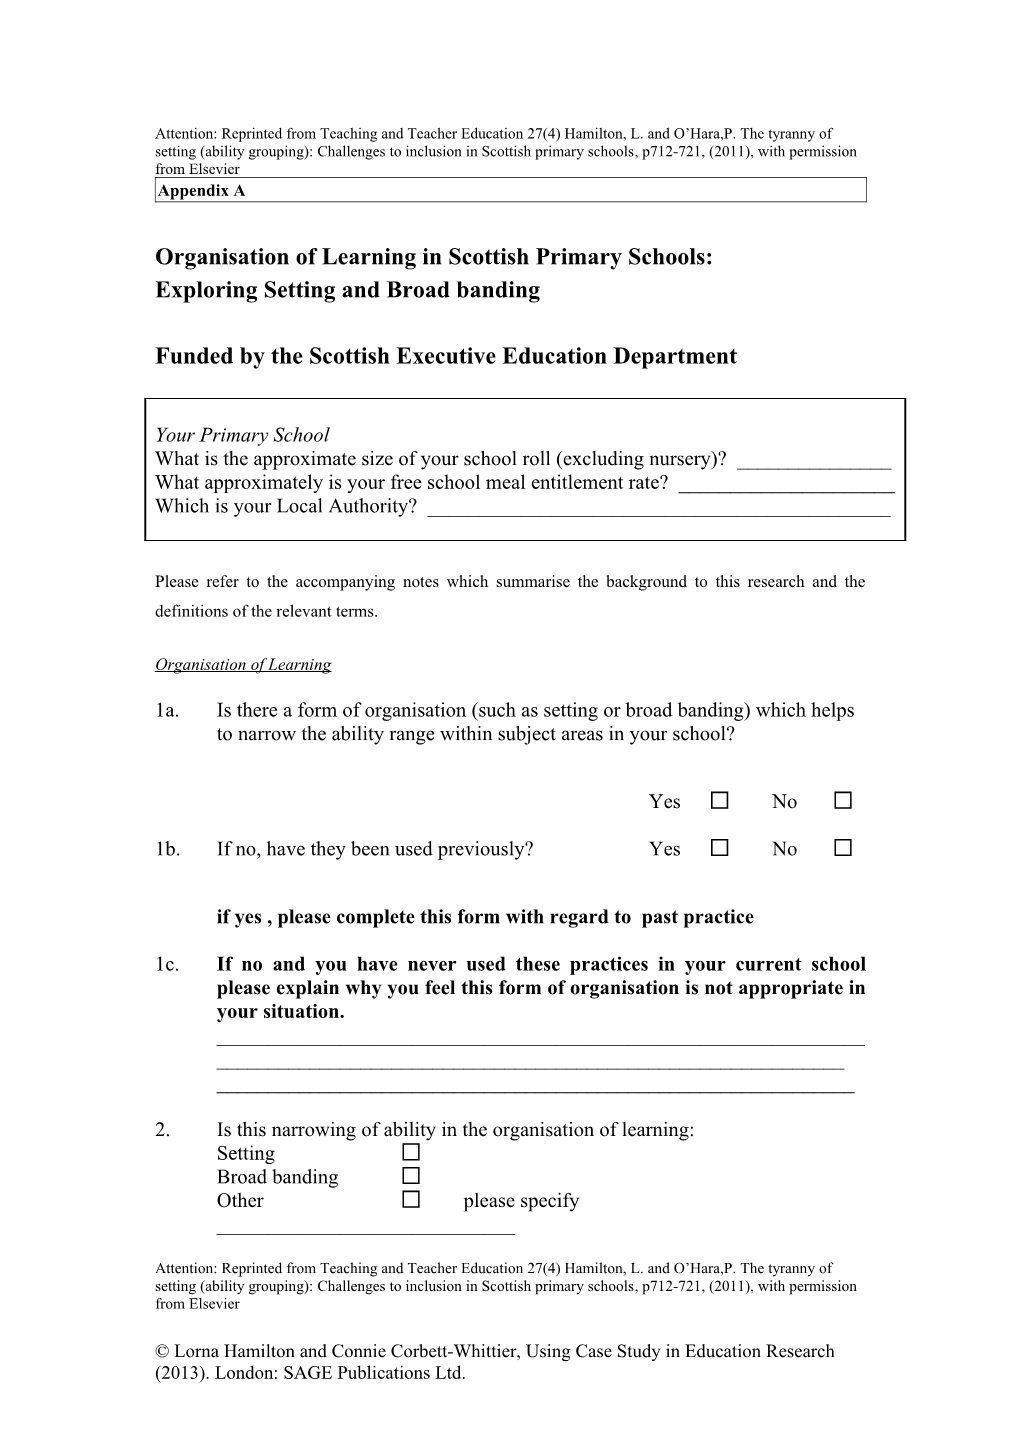 Organisation of Learning in Scottish Primary Schools